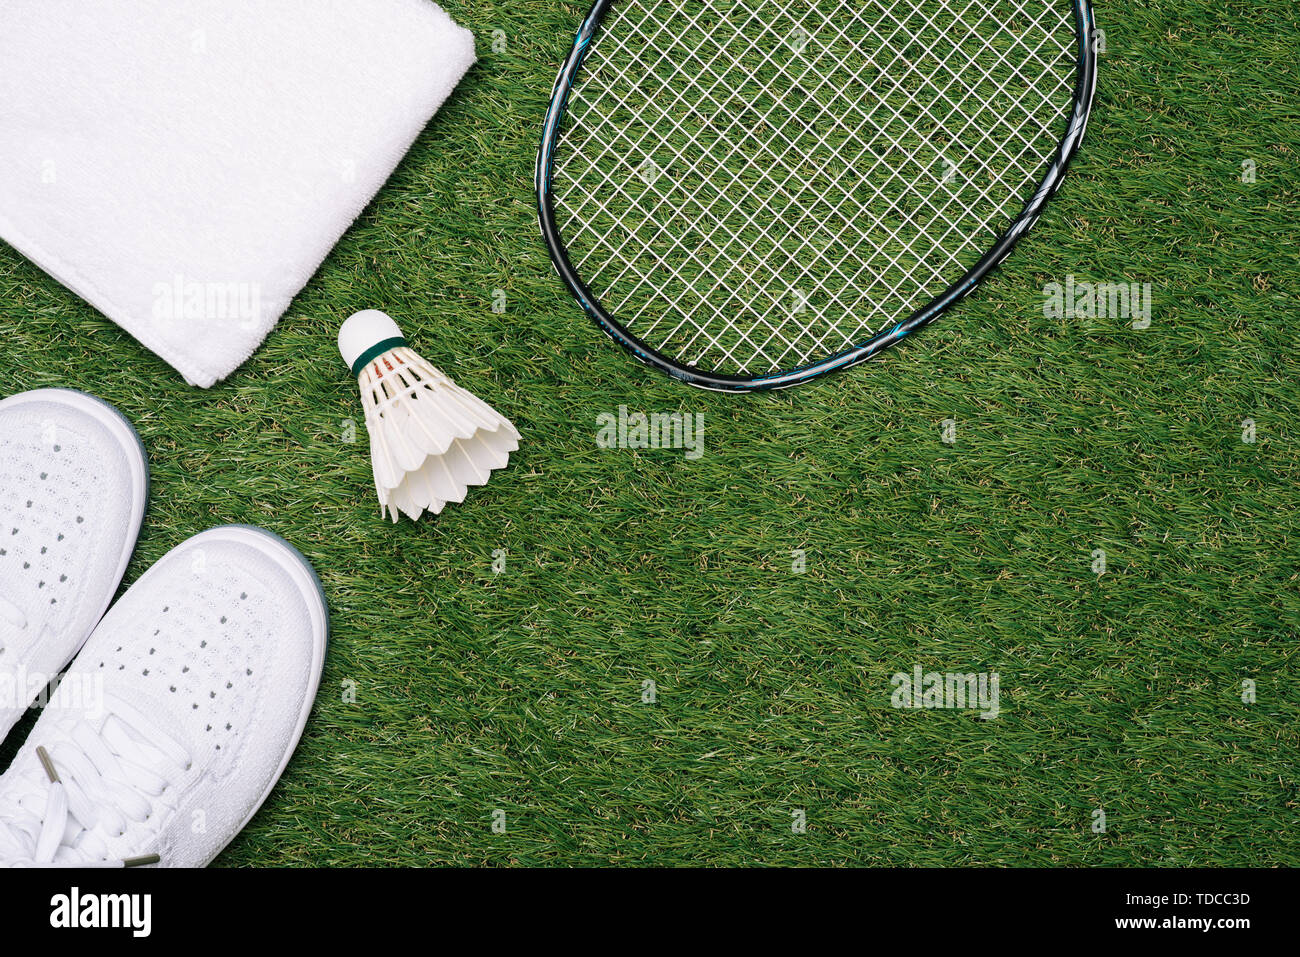 sports set of blue sport shoes and shuttlecocks with badminton racket on grass background in concept family activity Stock Photo